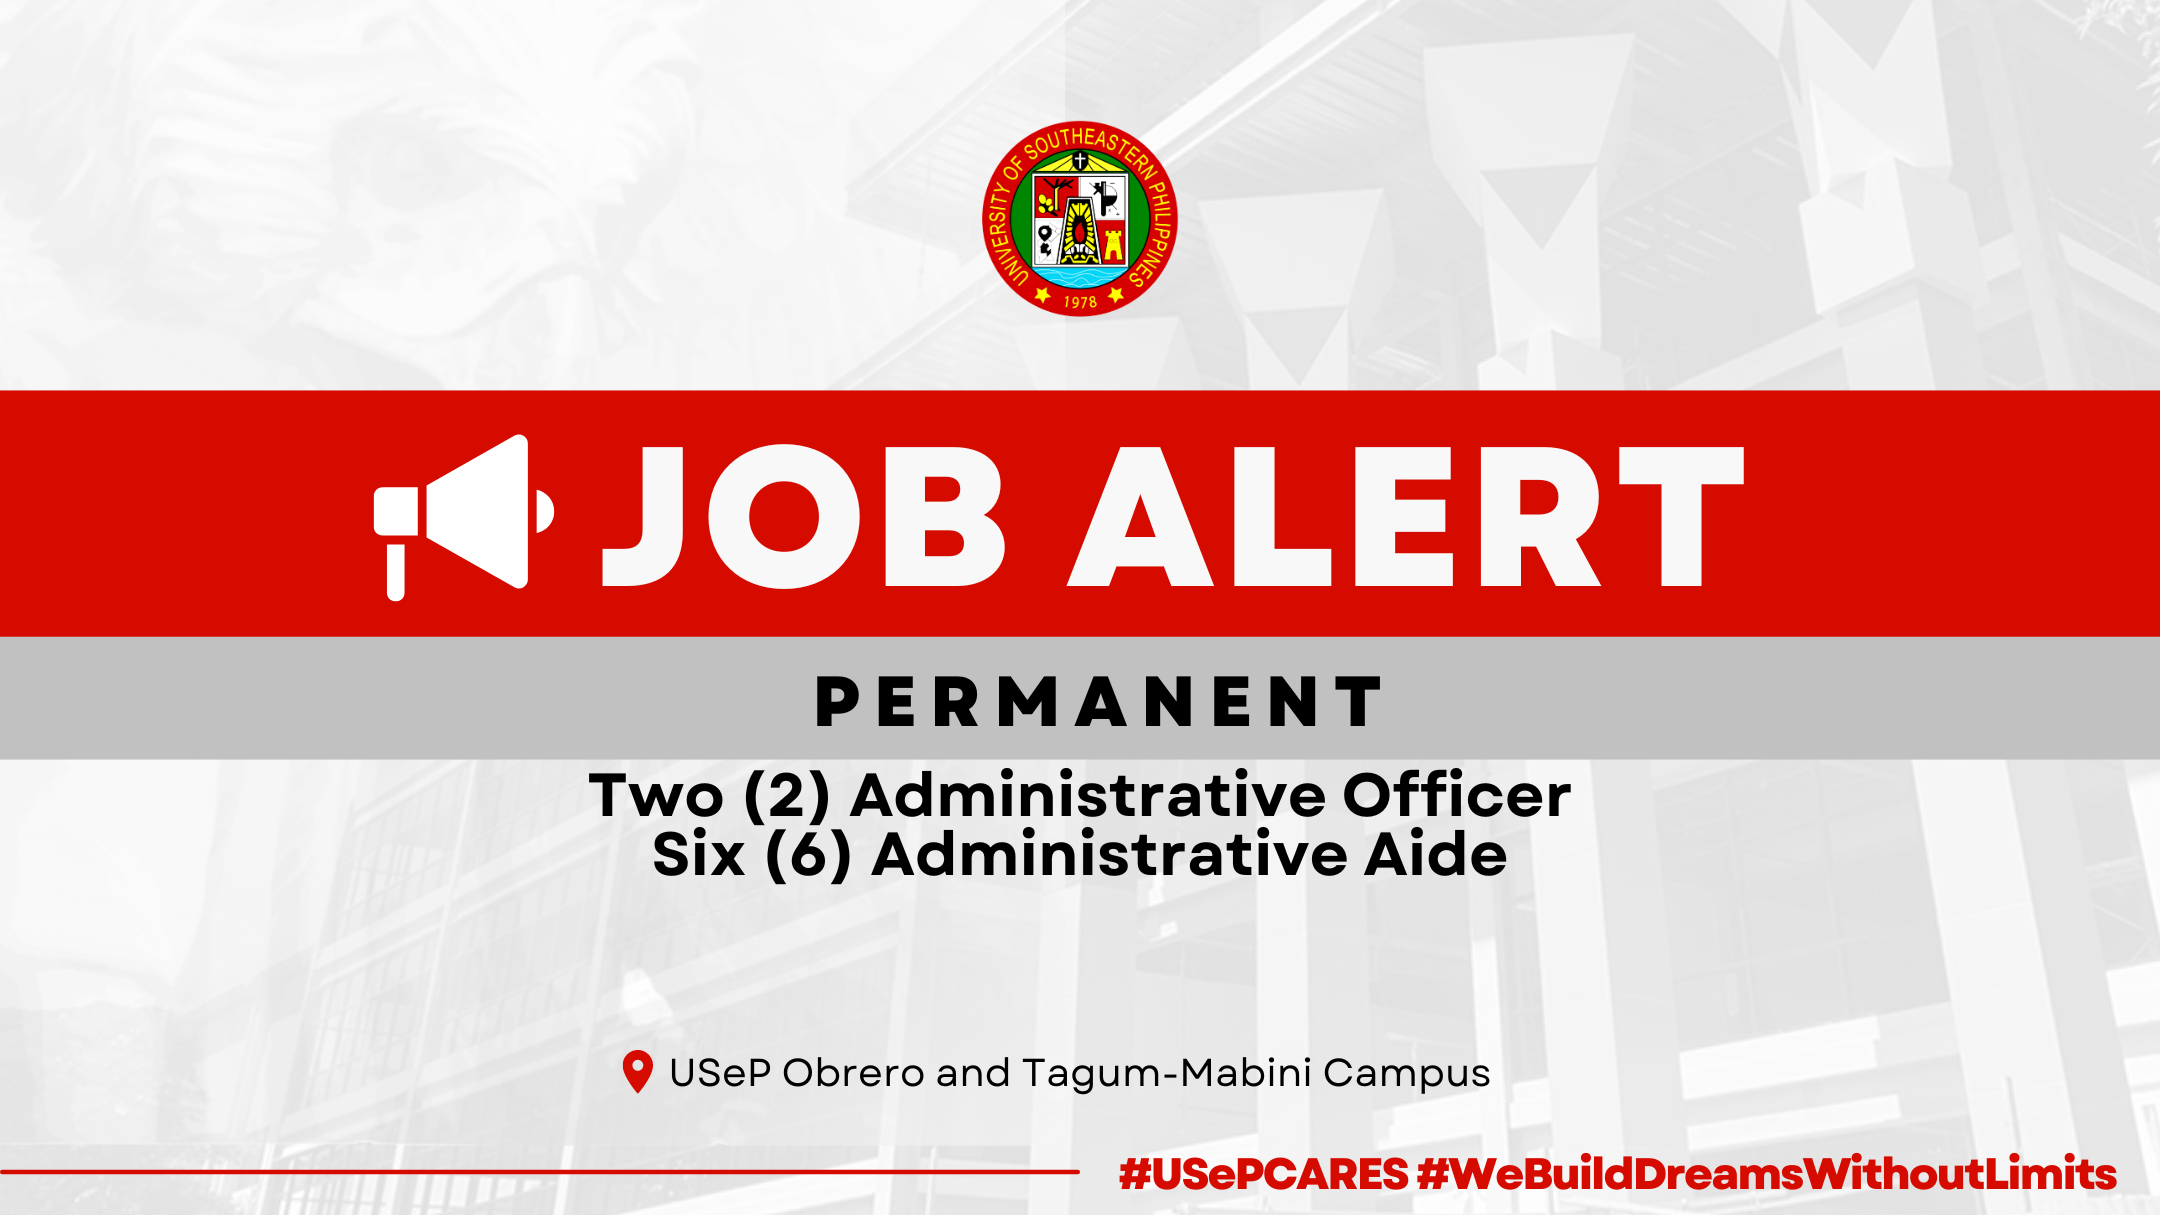 USeP Job Hiring! USeP is in need of eight (8) non-teaching personnel for the Obrero and Tagum-Mabini Campus